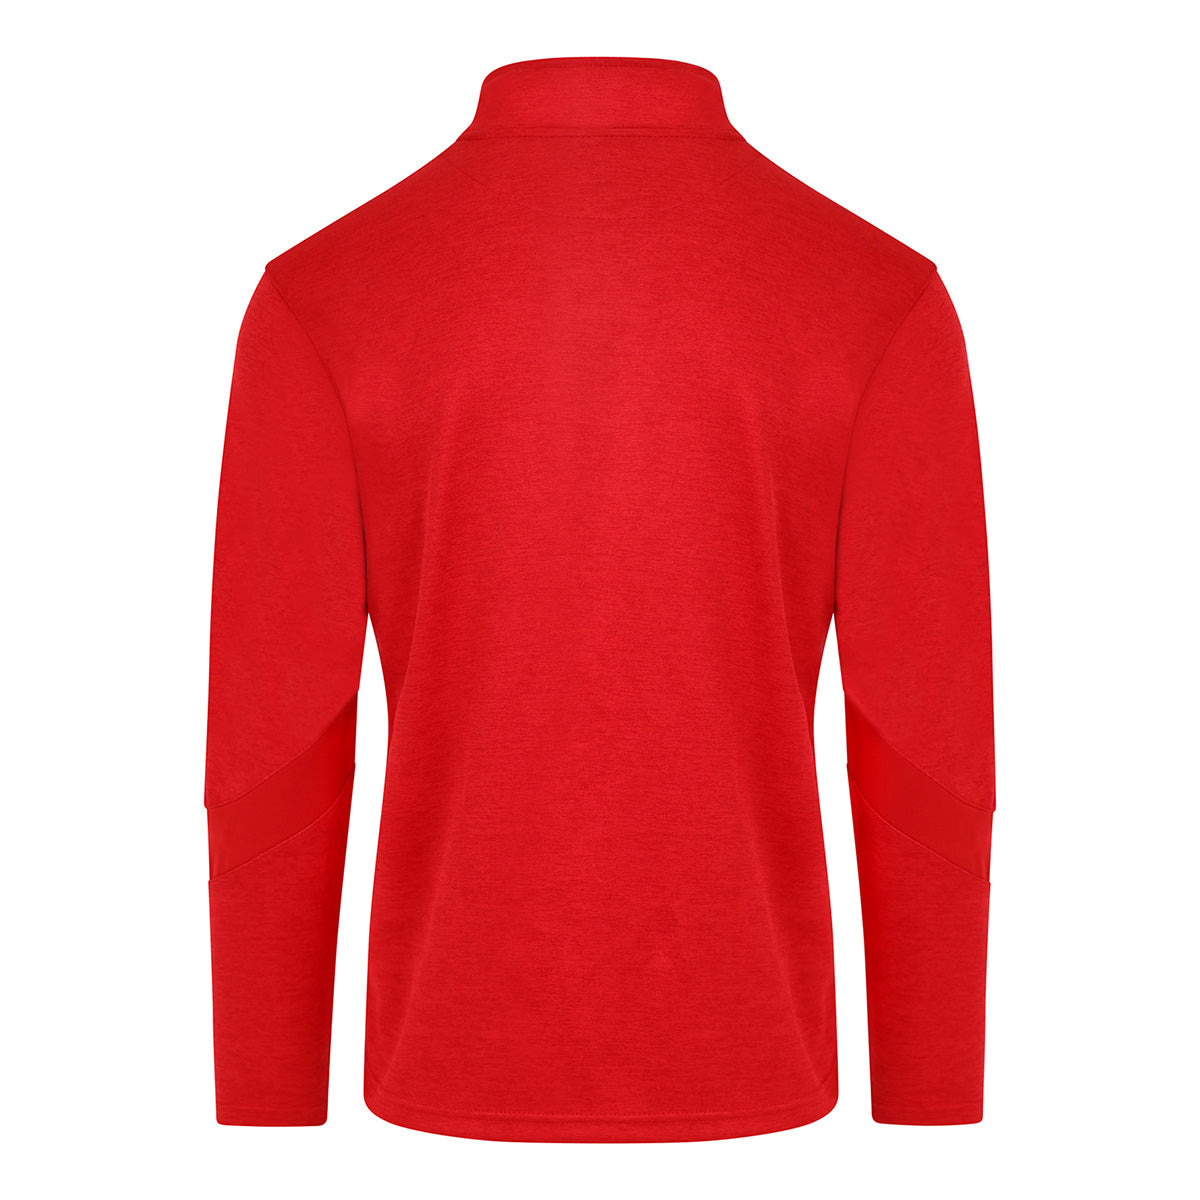 Mc Keever Caheragh Tadgh McCarthy's Core 22 1/4 Zip Top - Youth - Red